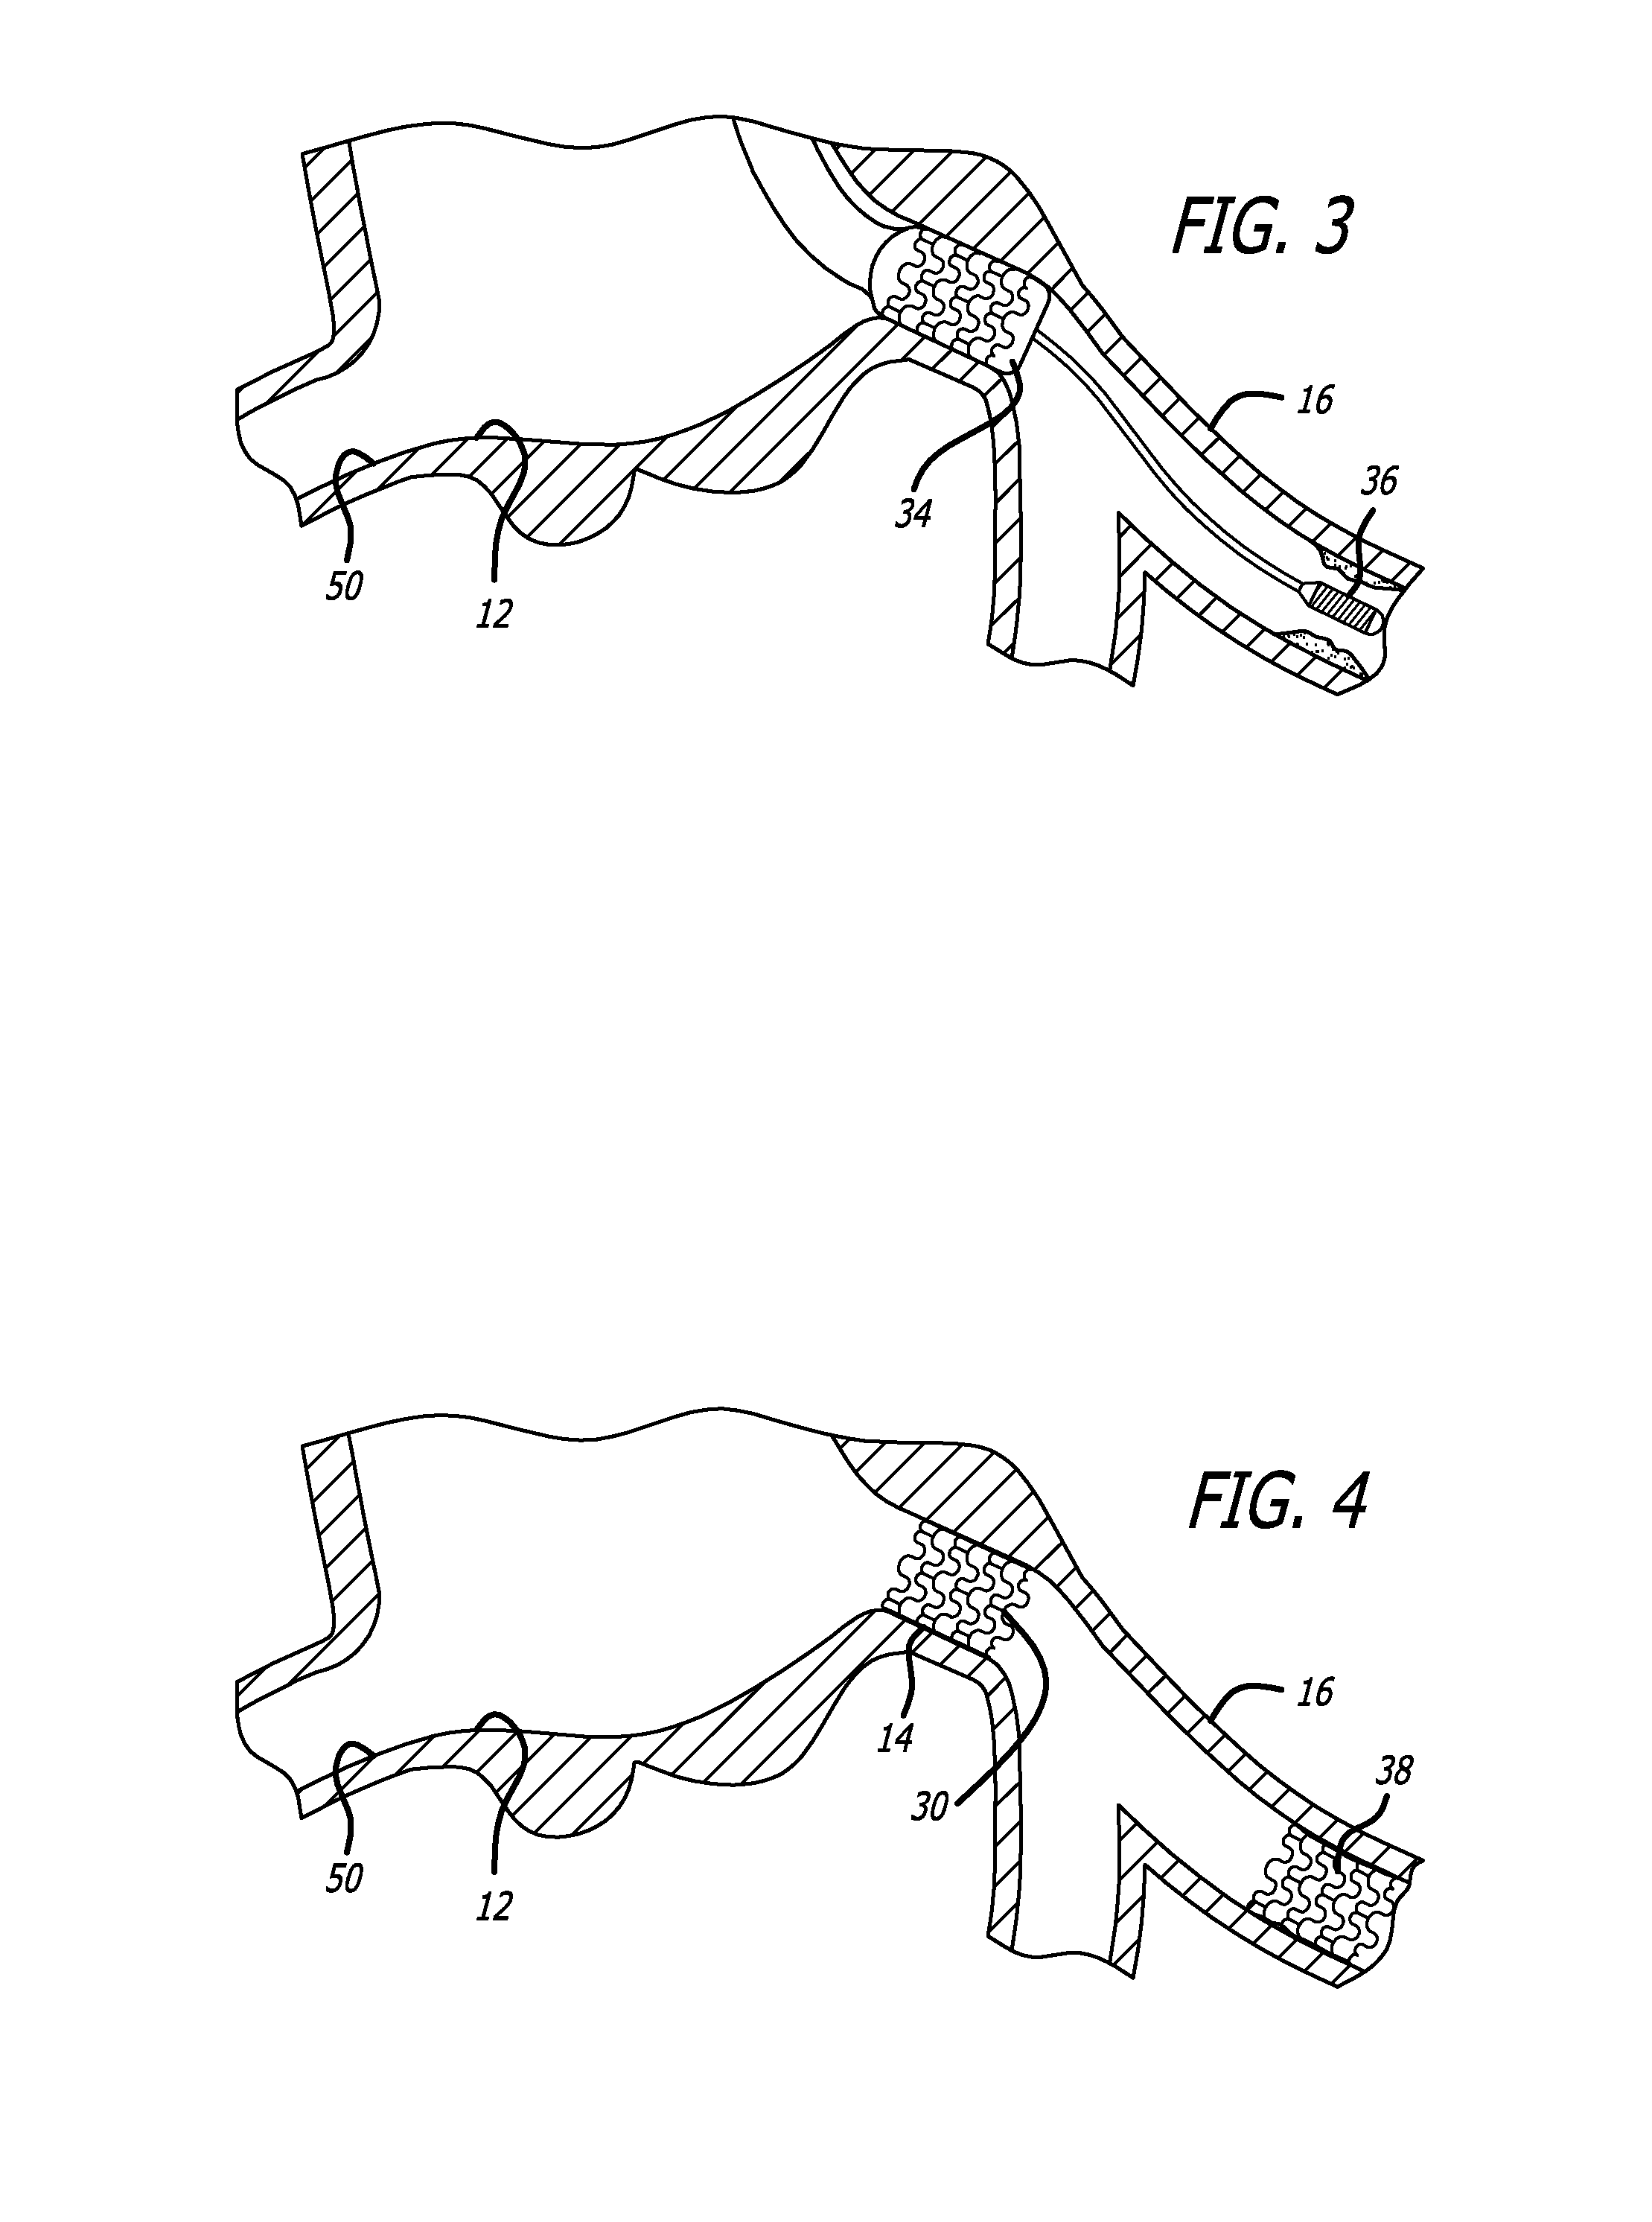 Methods for implanting a stent using a guide catheter